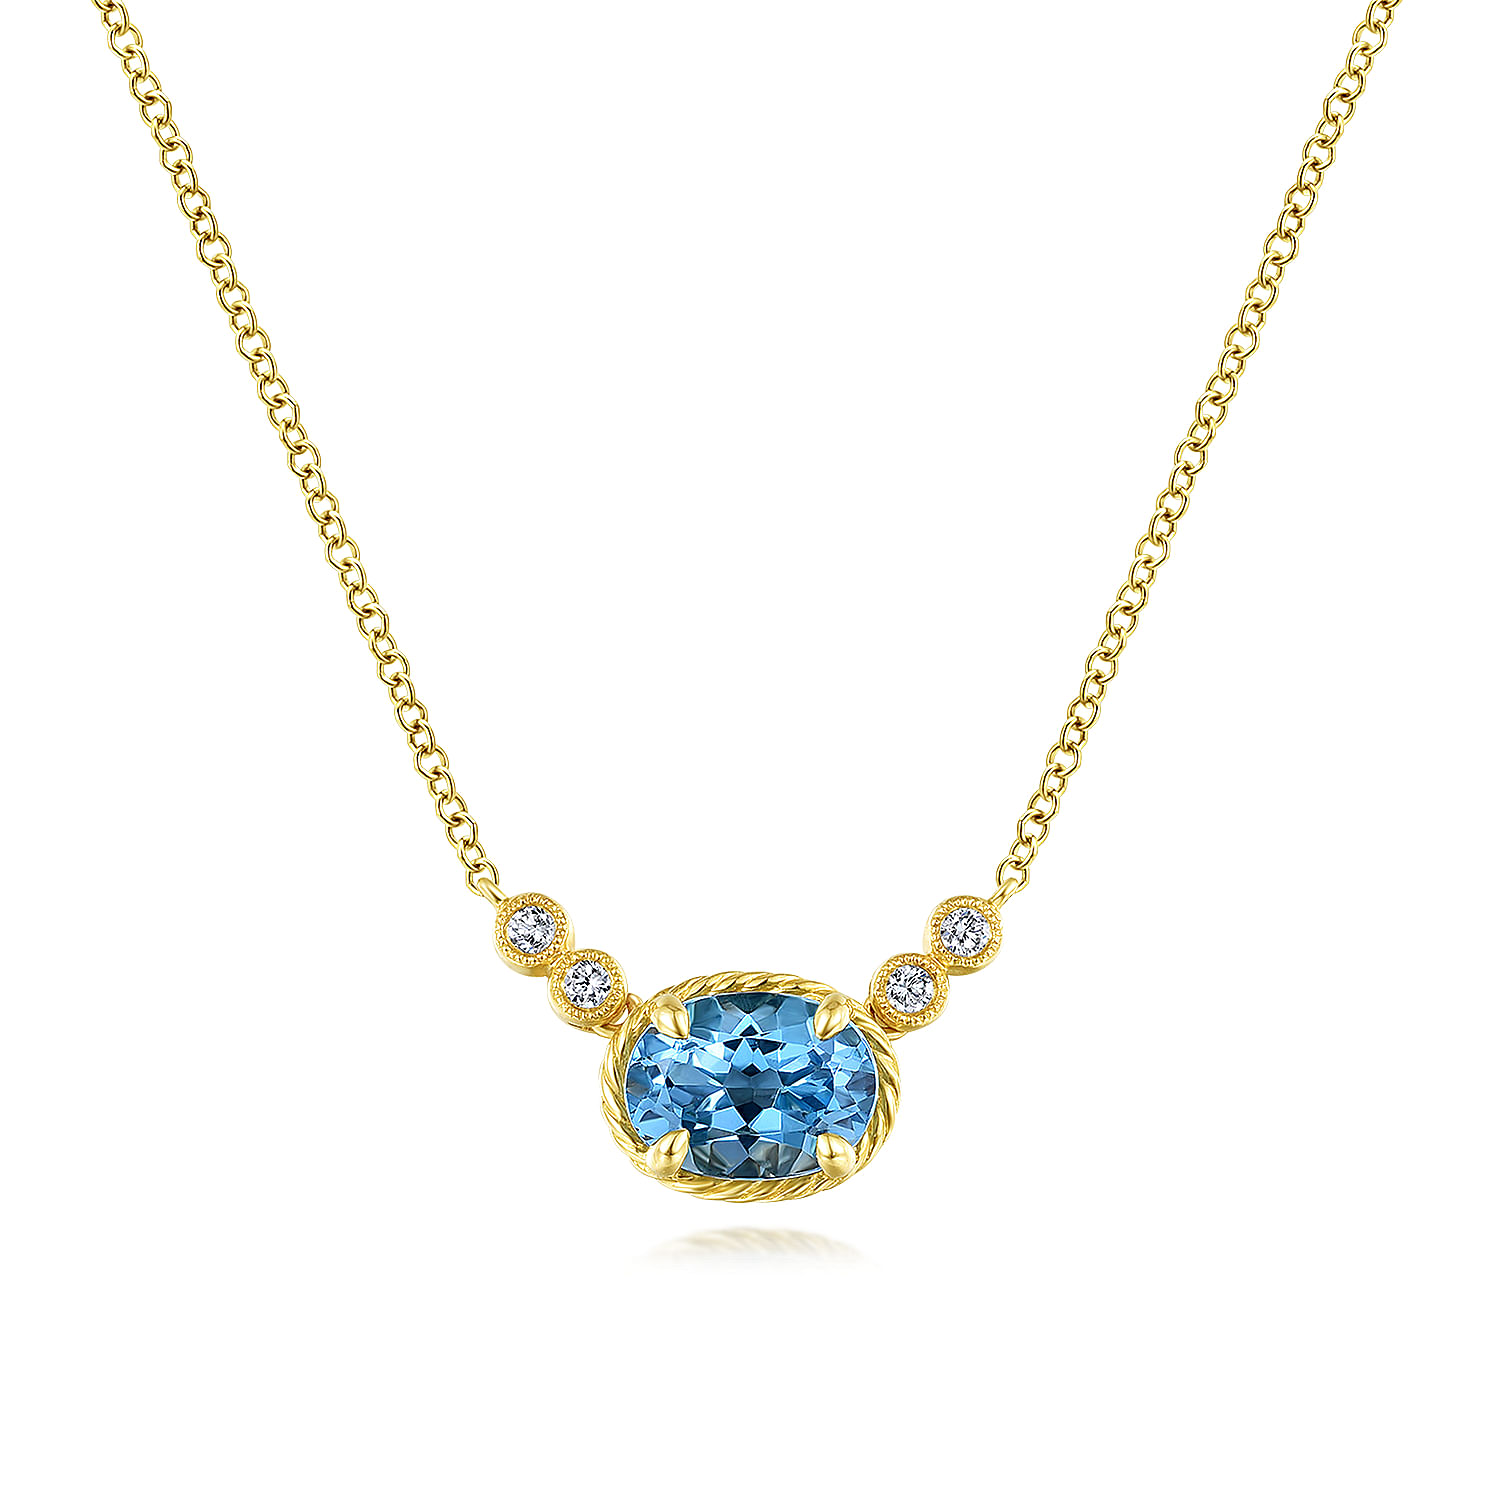 Gabriel - 14K Yellow Gold Oval Swiss Blue Topaz Pendant Necklace with Diamond Accents